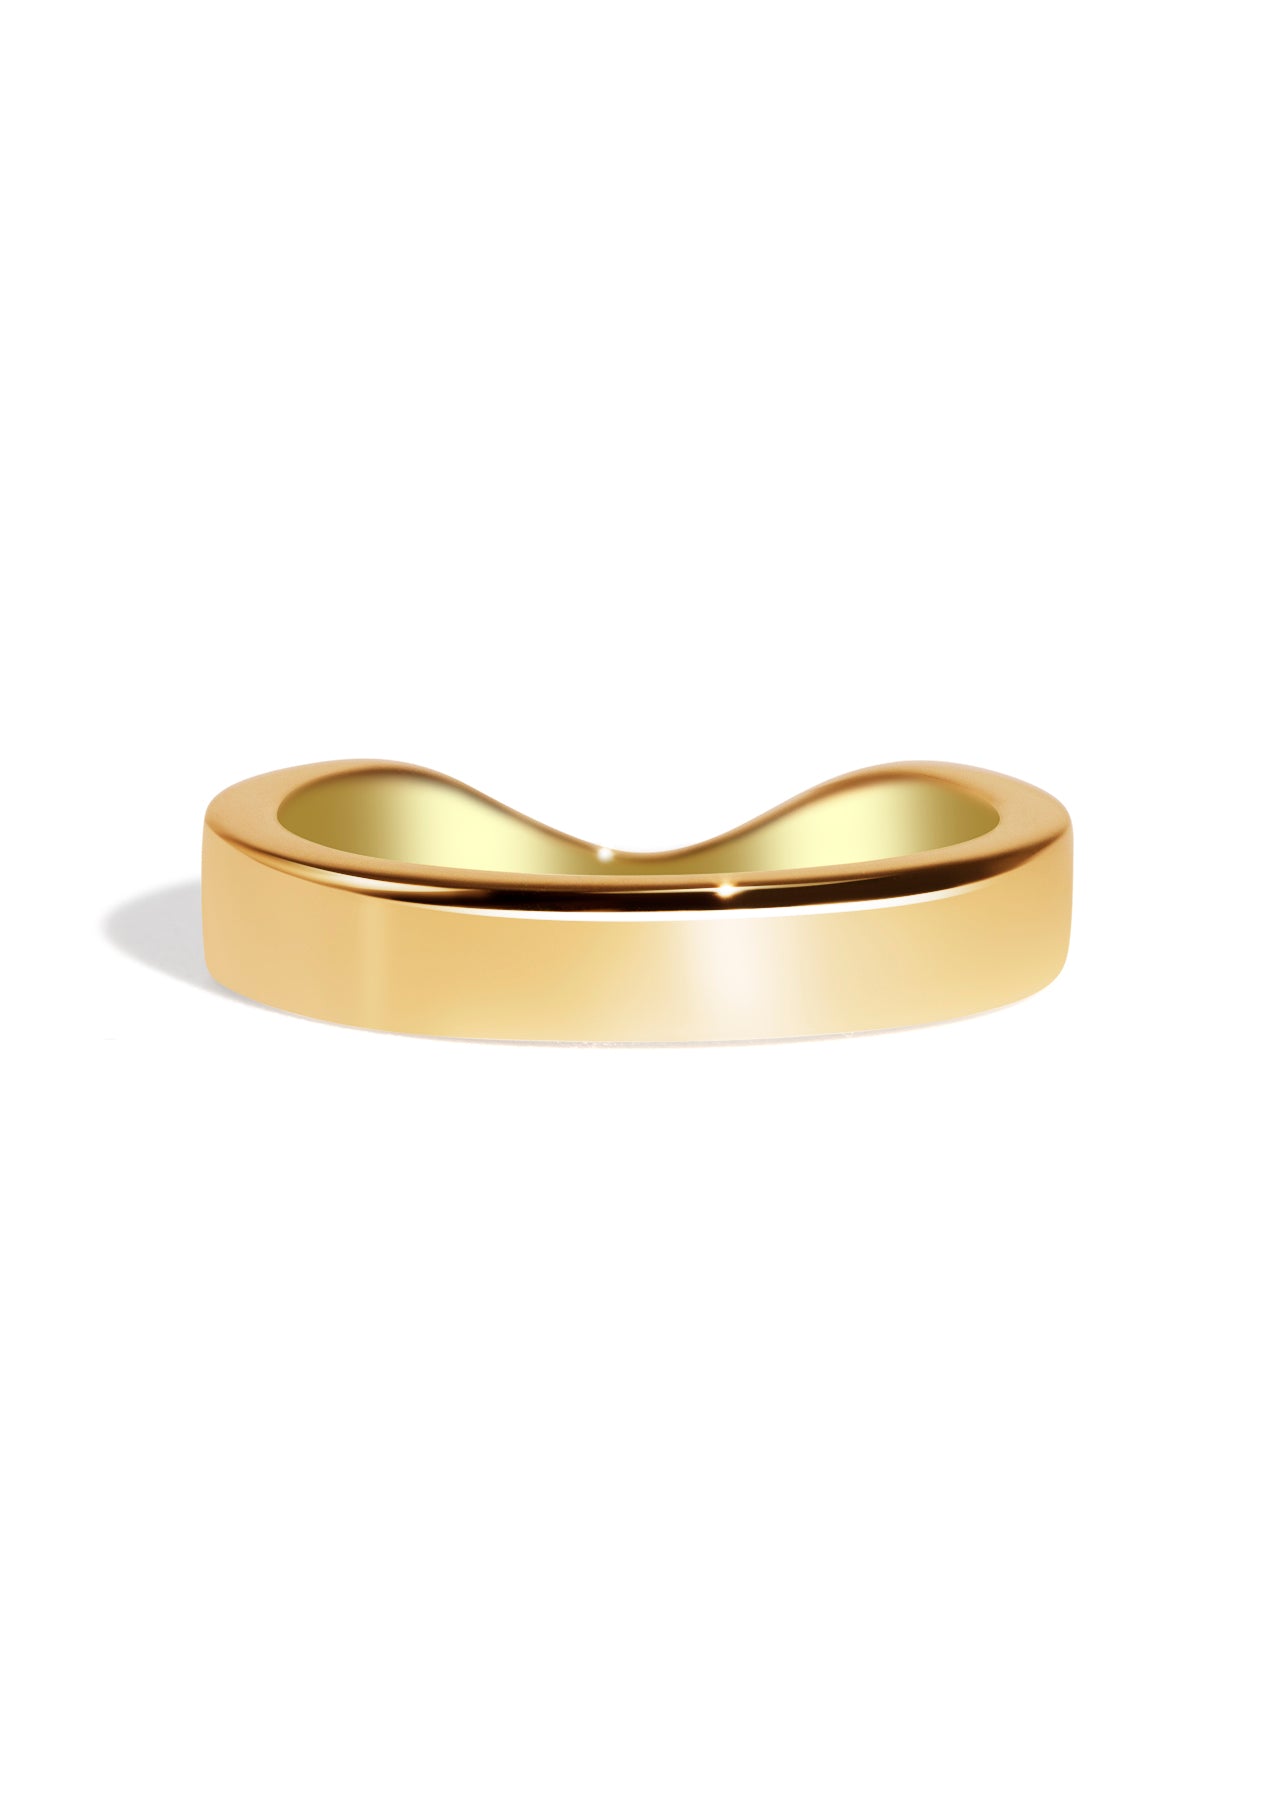 The Swoop Yellow Gold Band